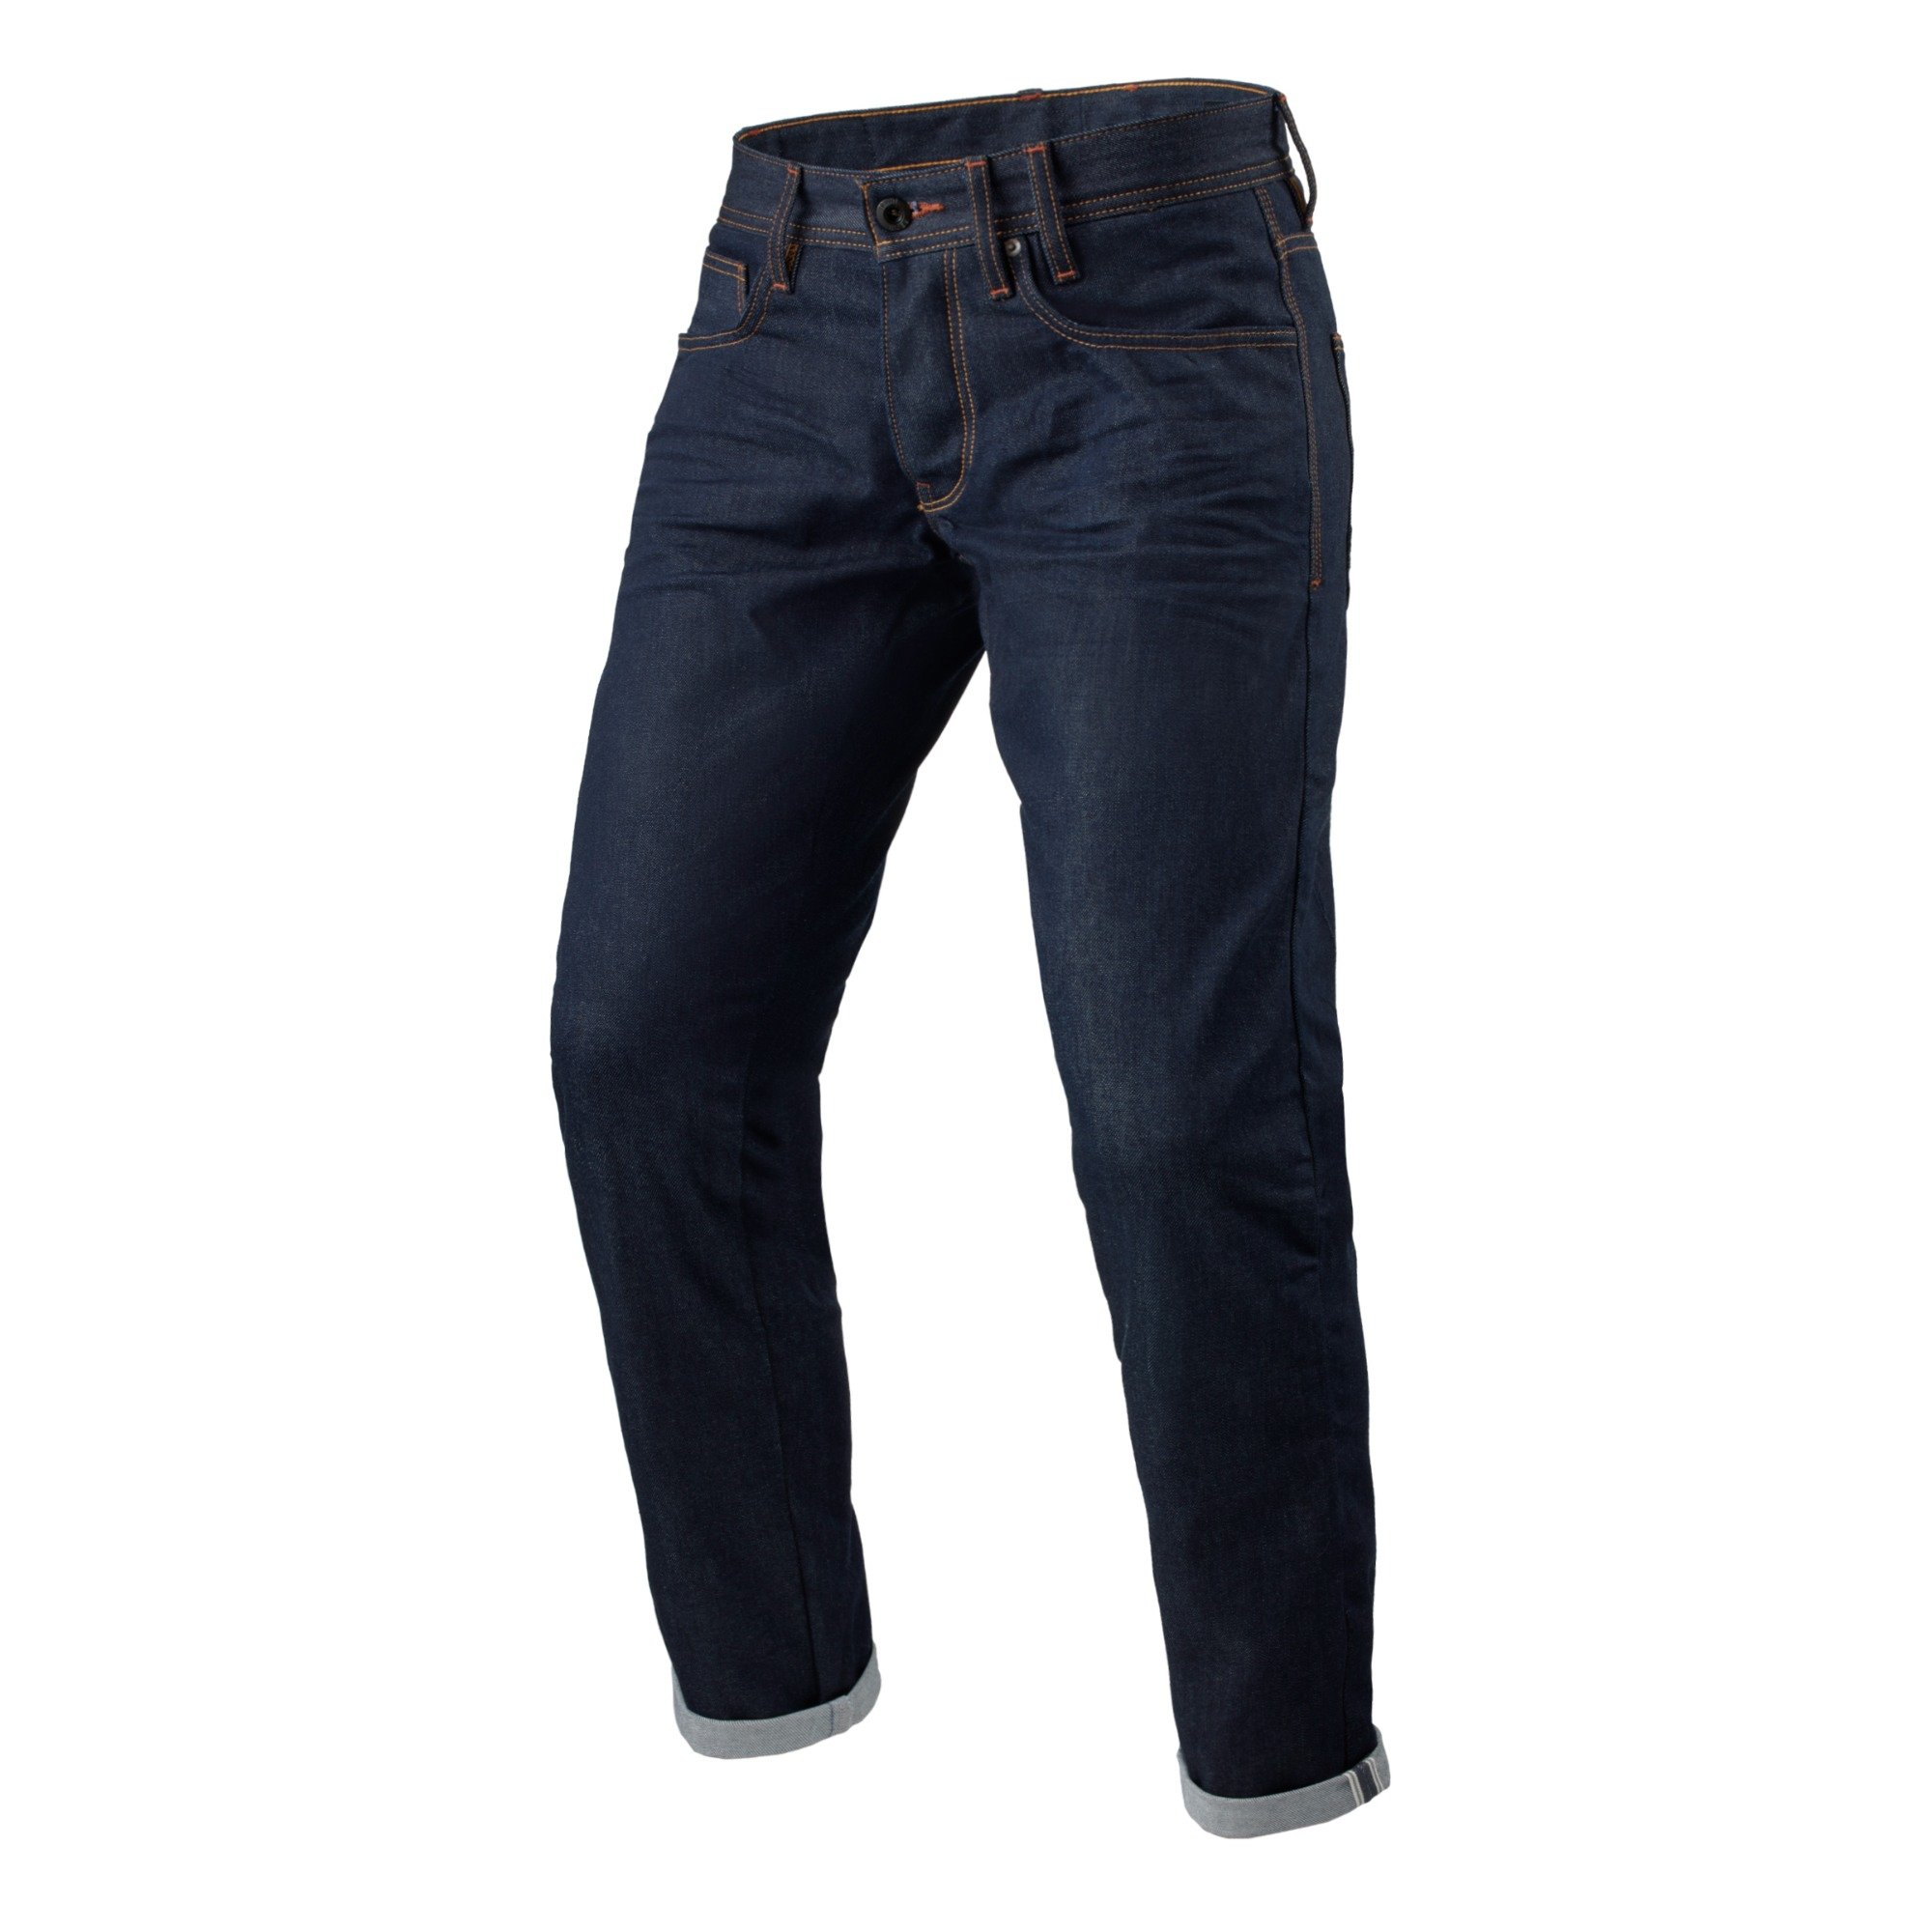 Image of REV'IT! Jeans Lewis Selvedge TF Dark Blue L34 Motorcycle Pants Size L34/W34 ID 8700001357982